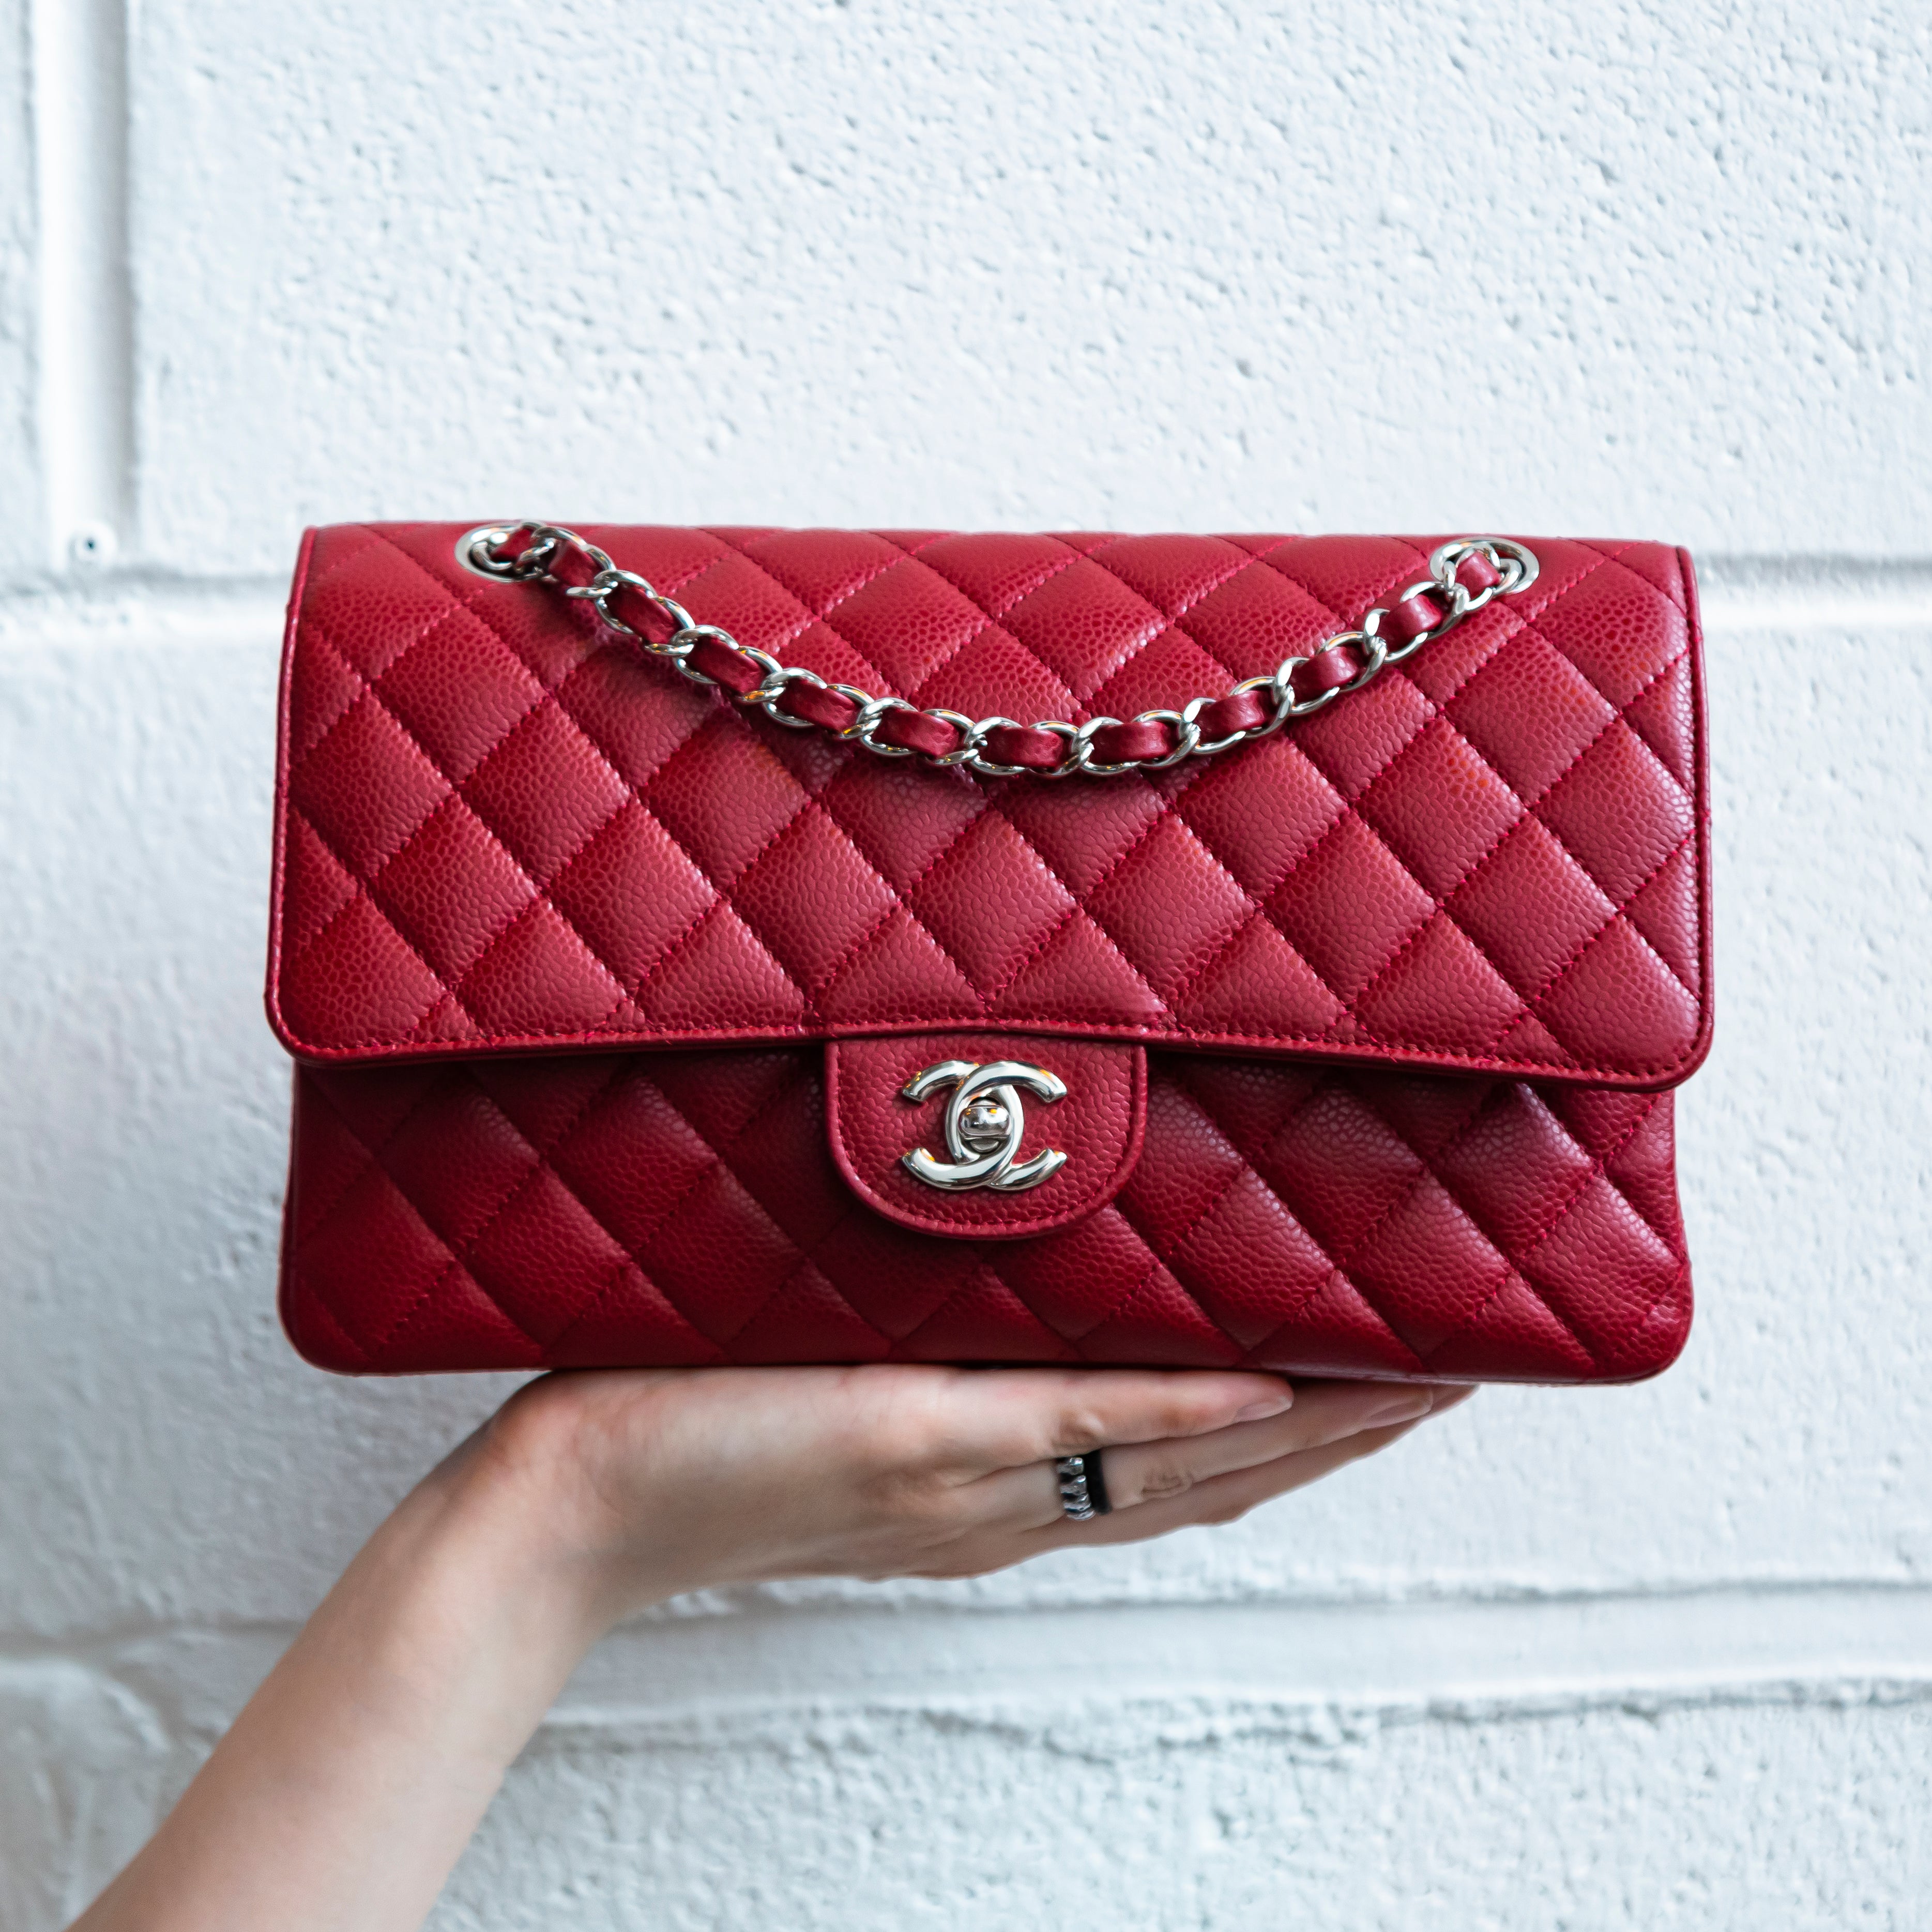 Chanel Financial Report – The Best Chanel online Outlet Store. Buy Discount Chanel  Handbags, Wallets, Shoes from Chanel online Store